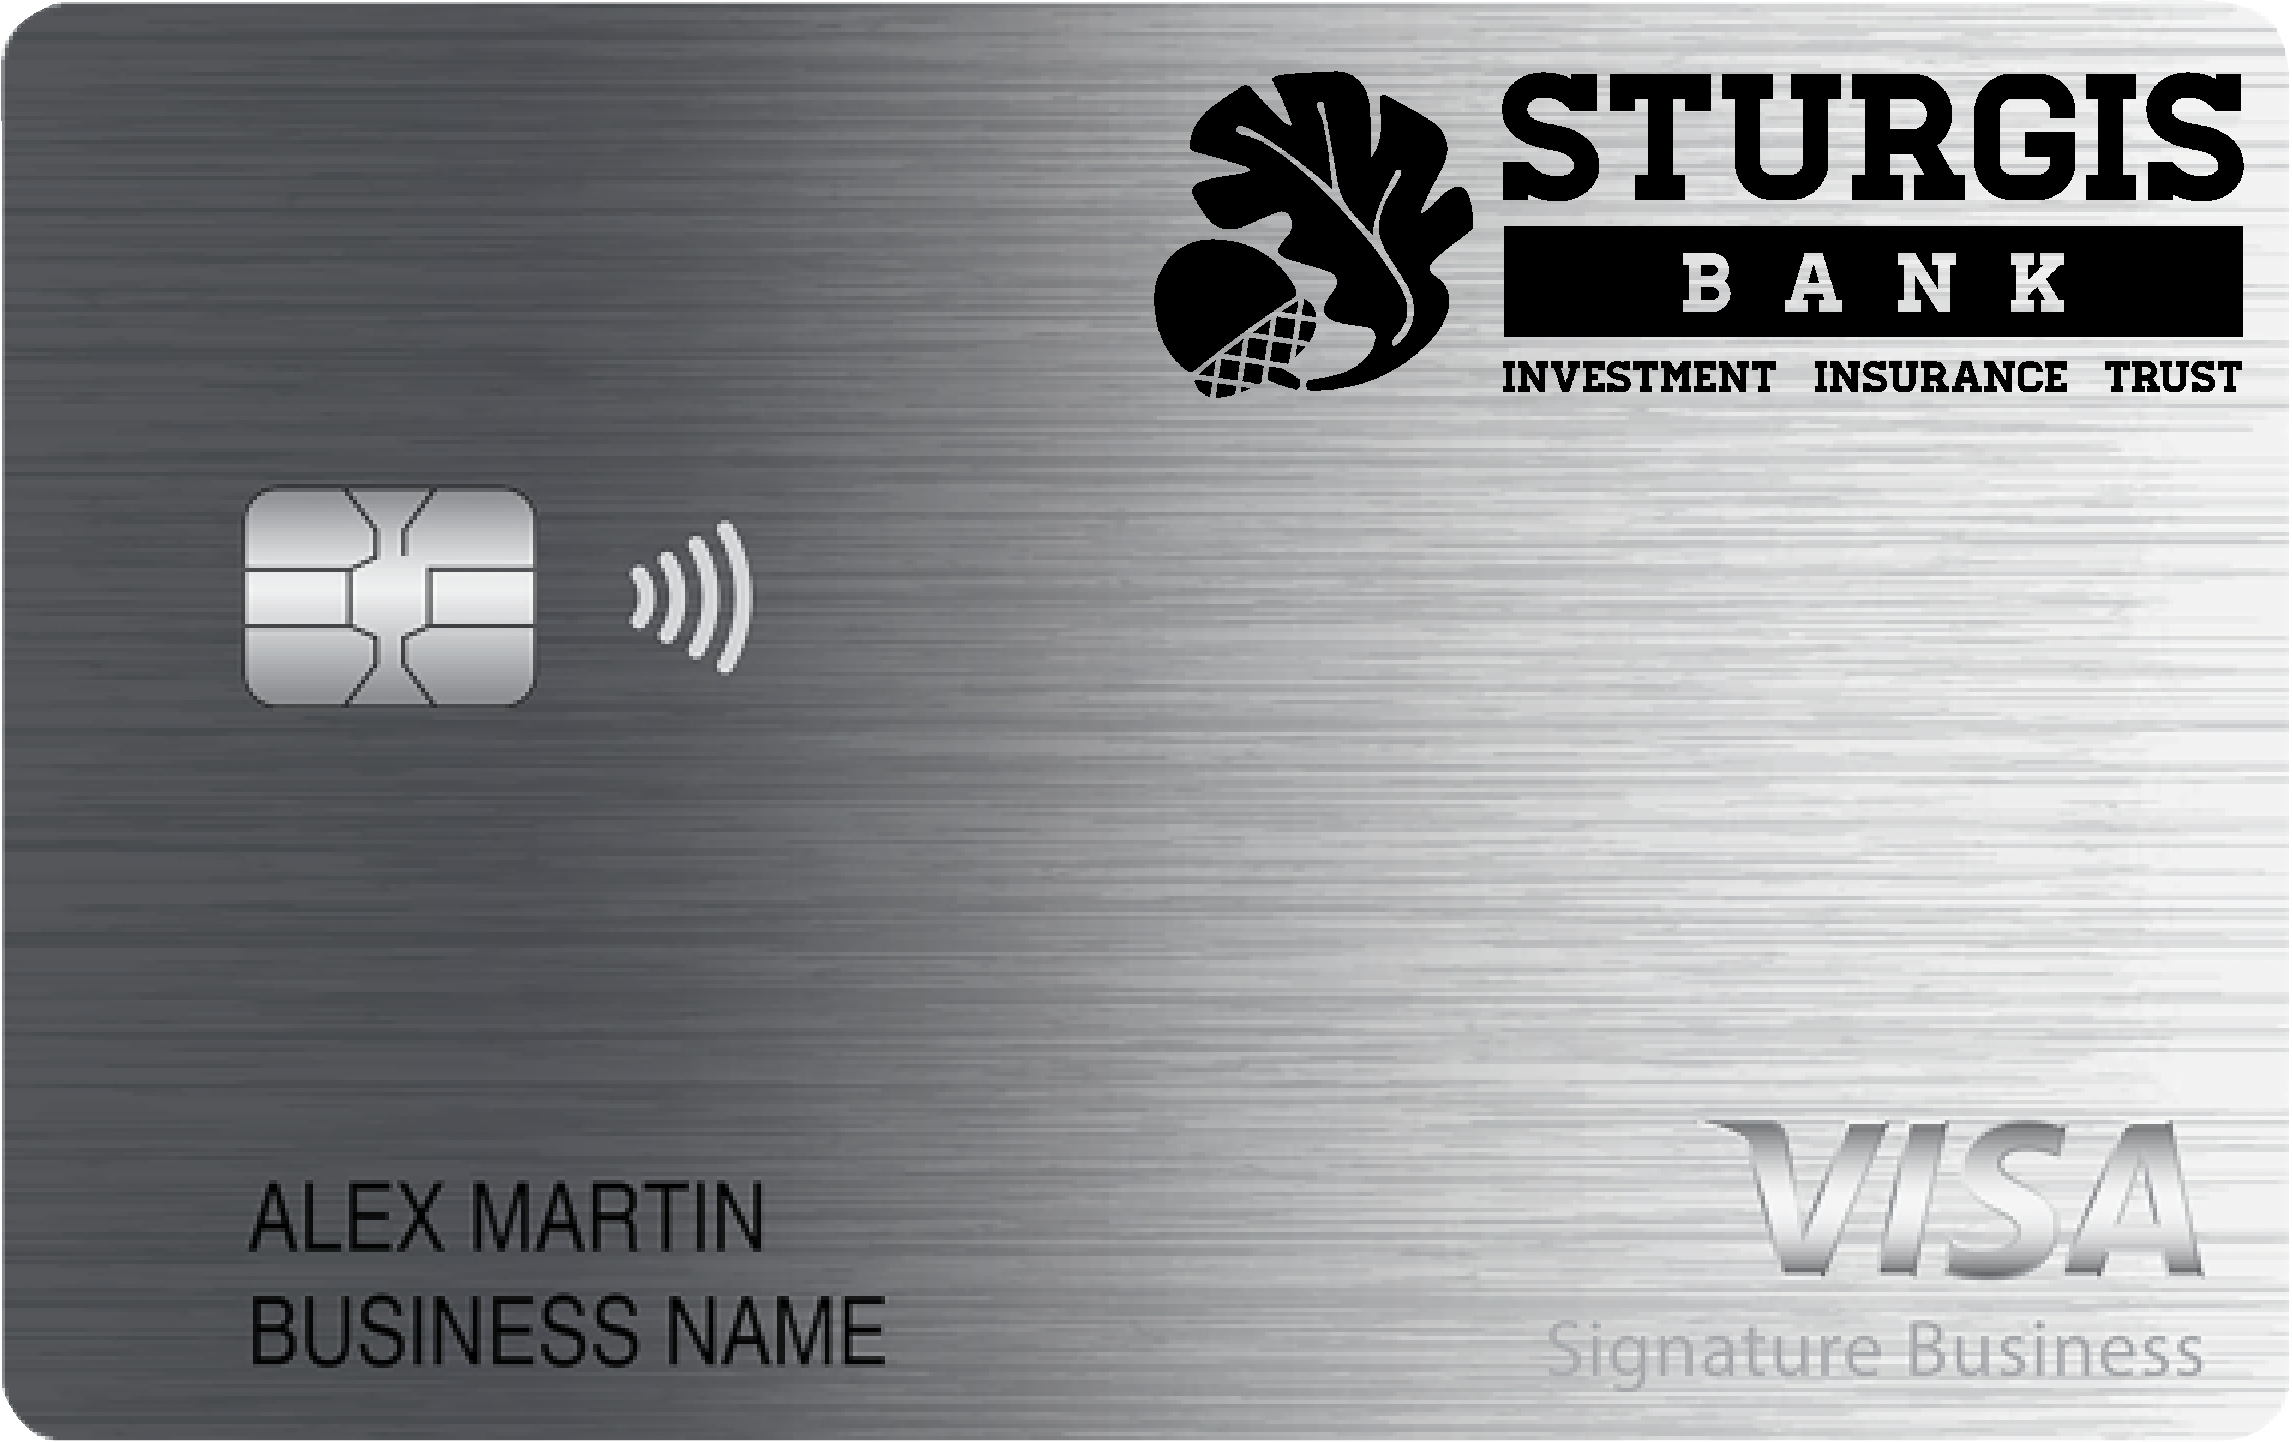 Sturgis Bank and Trust Company Smart Business Rewards Card